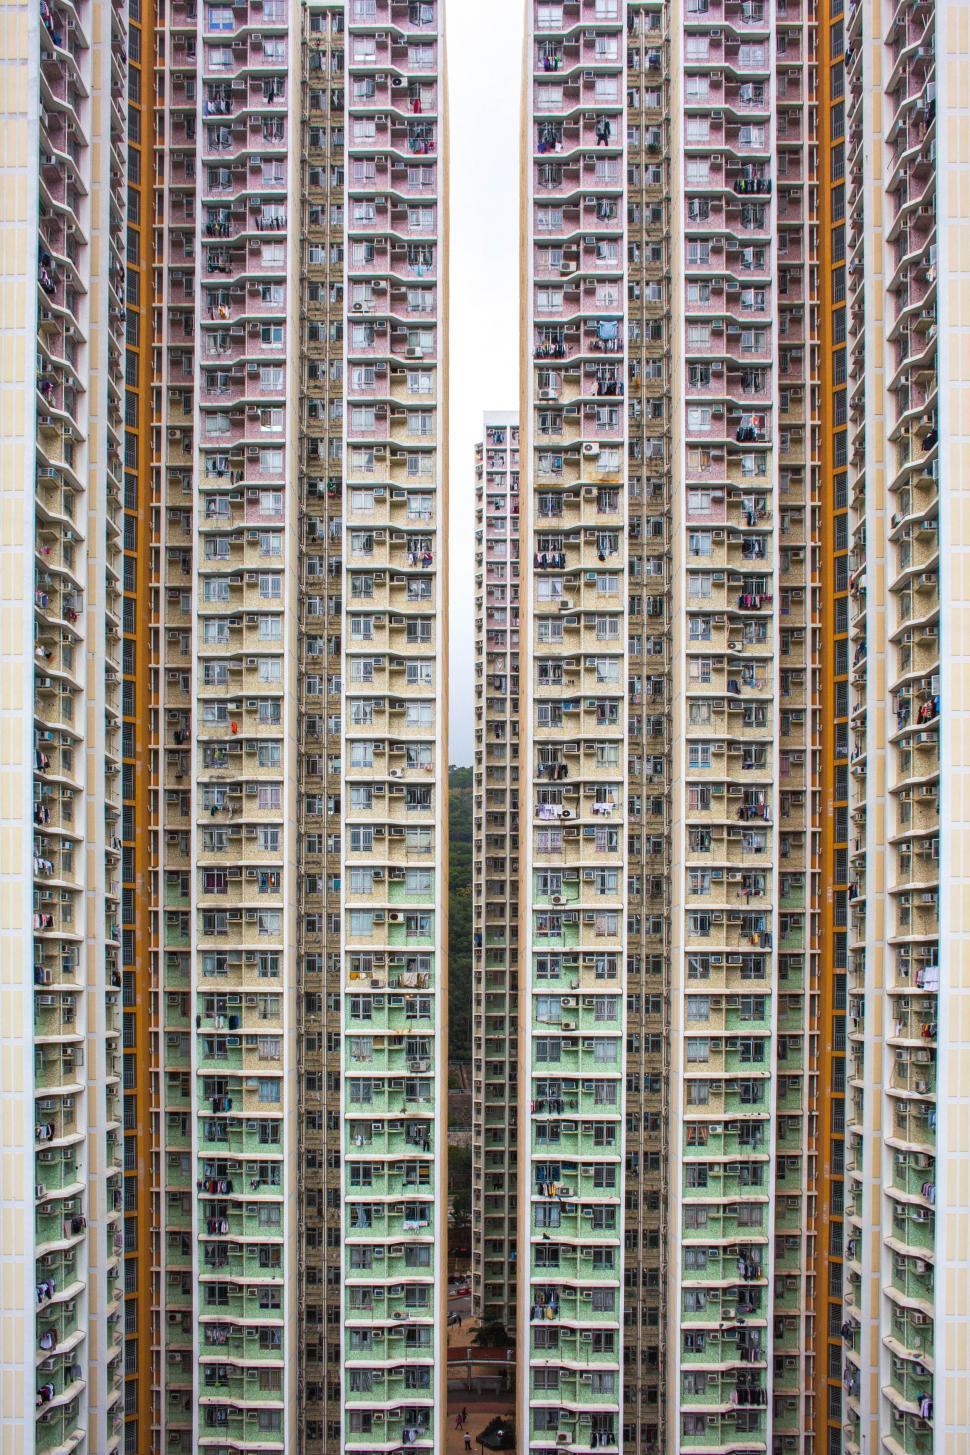 Free Image of Tall Buildings Standing Adjacent 